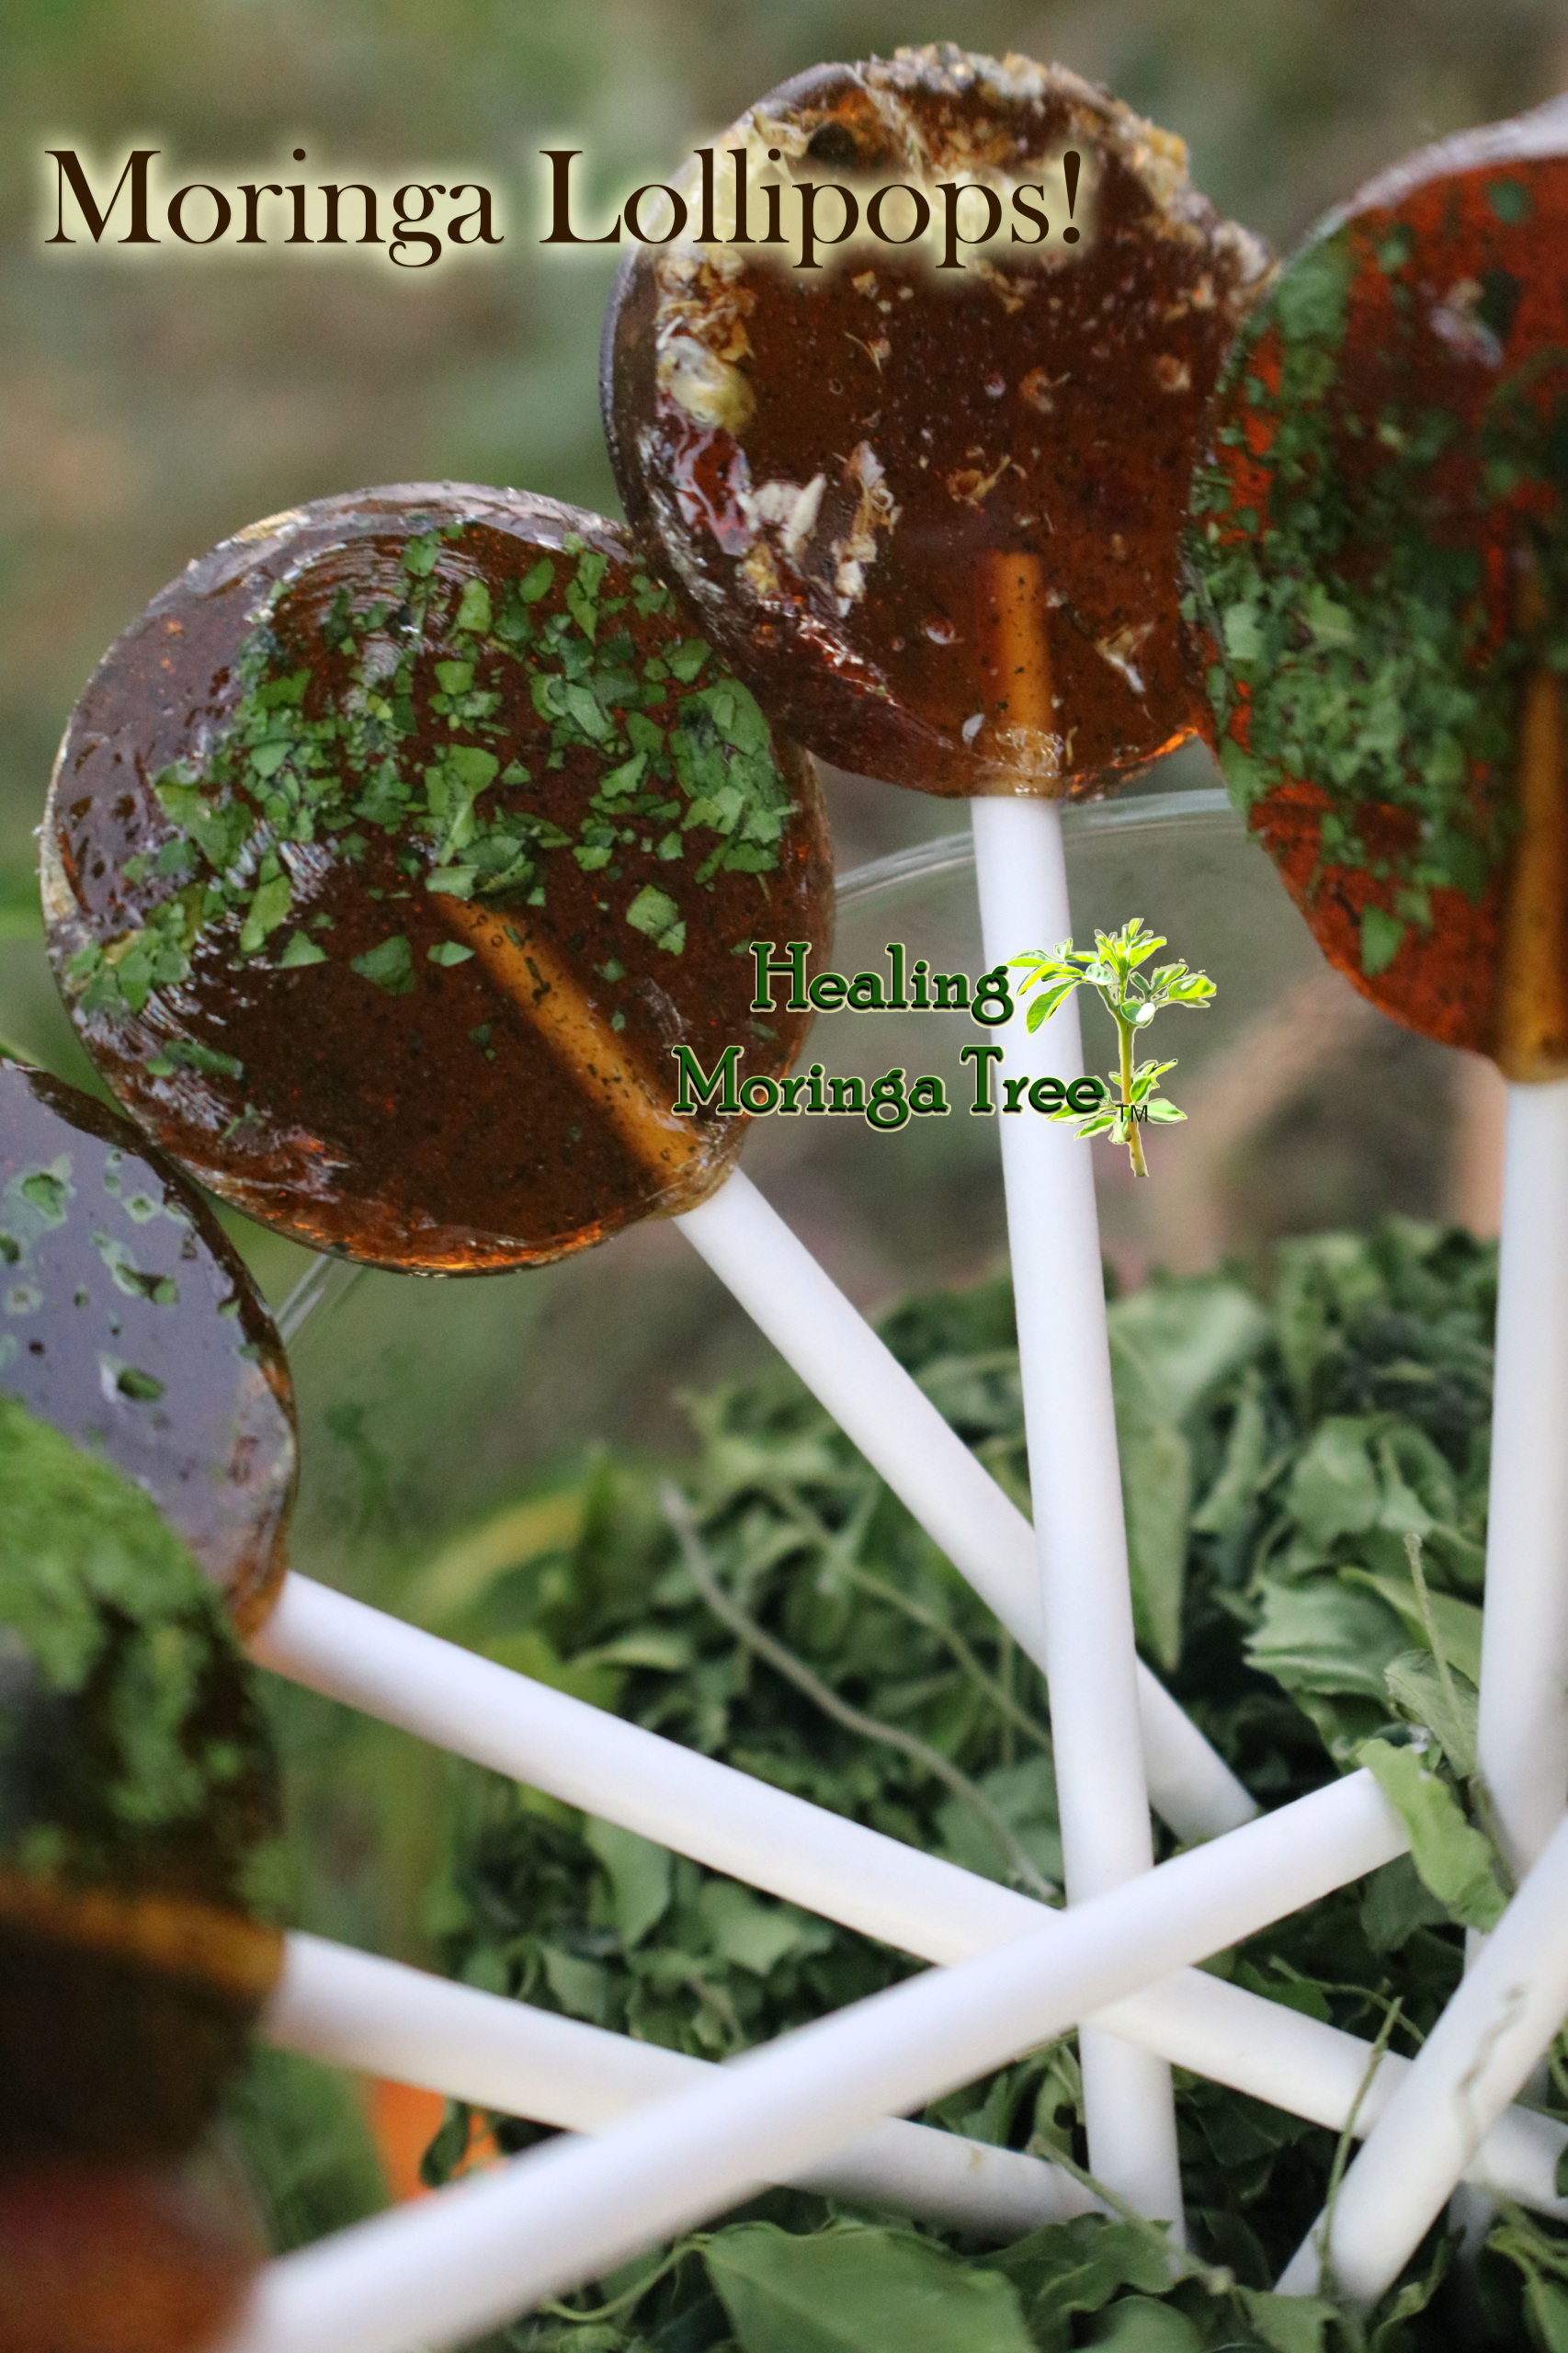 Moringa Lollipops (Out Of stock)